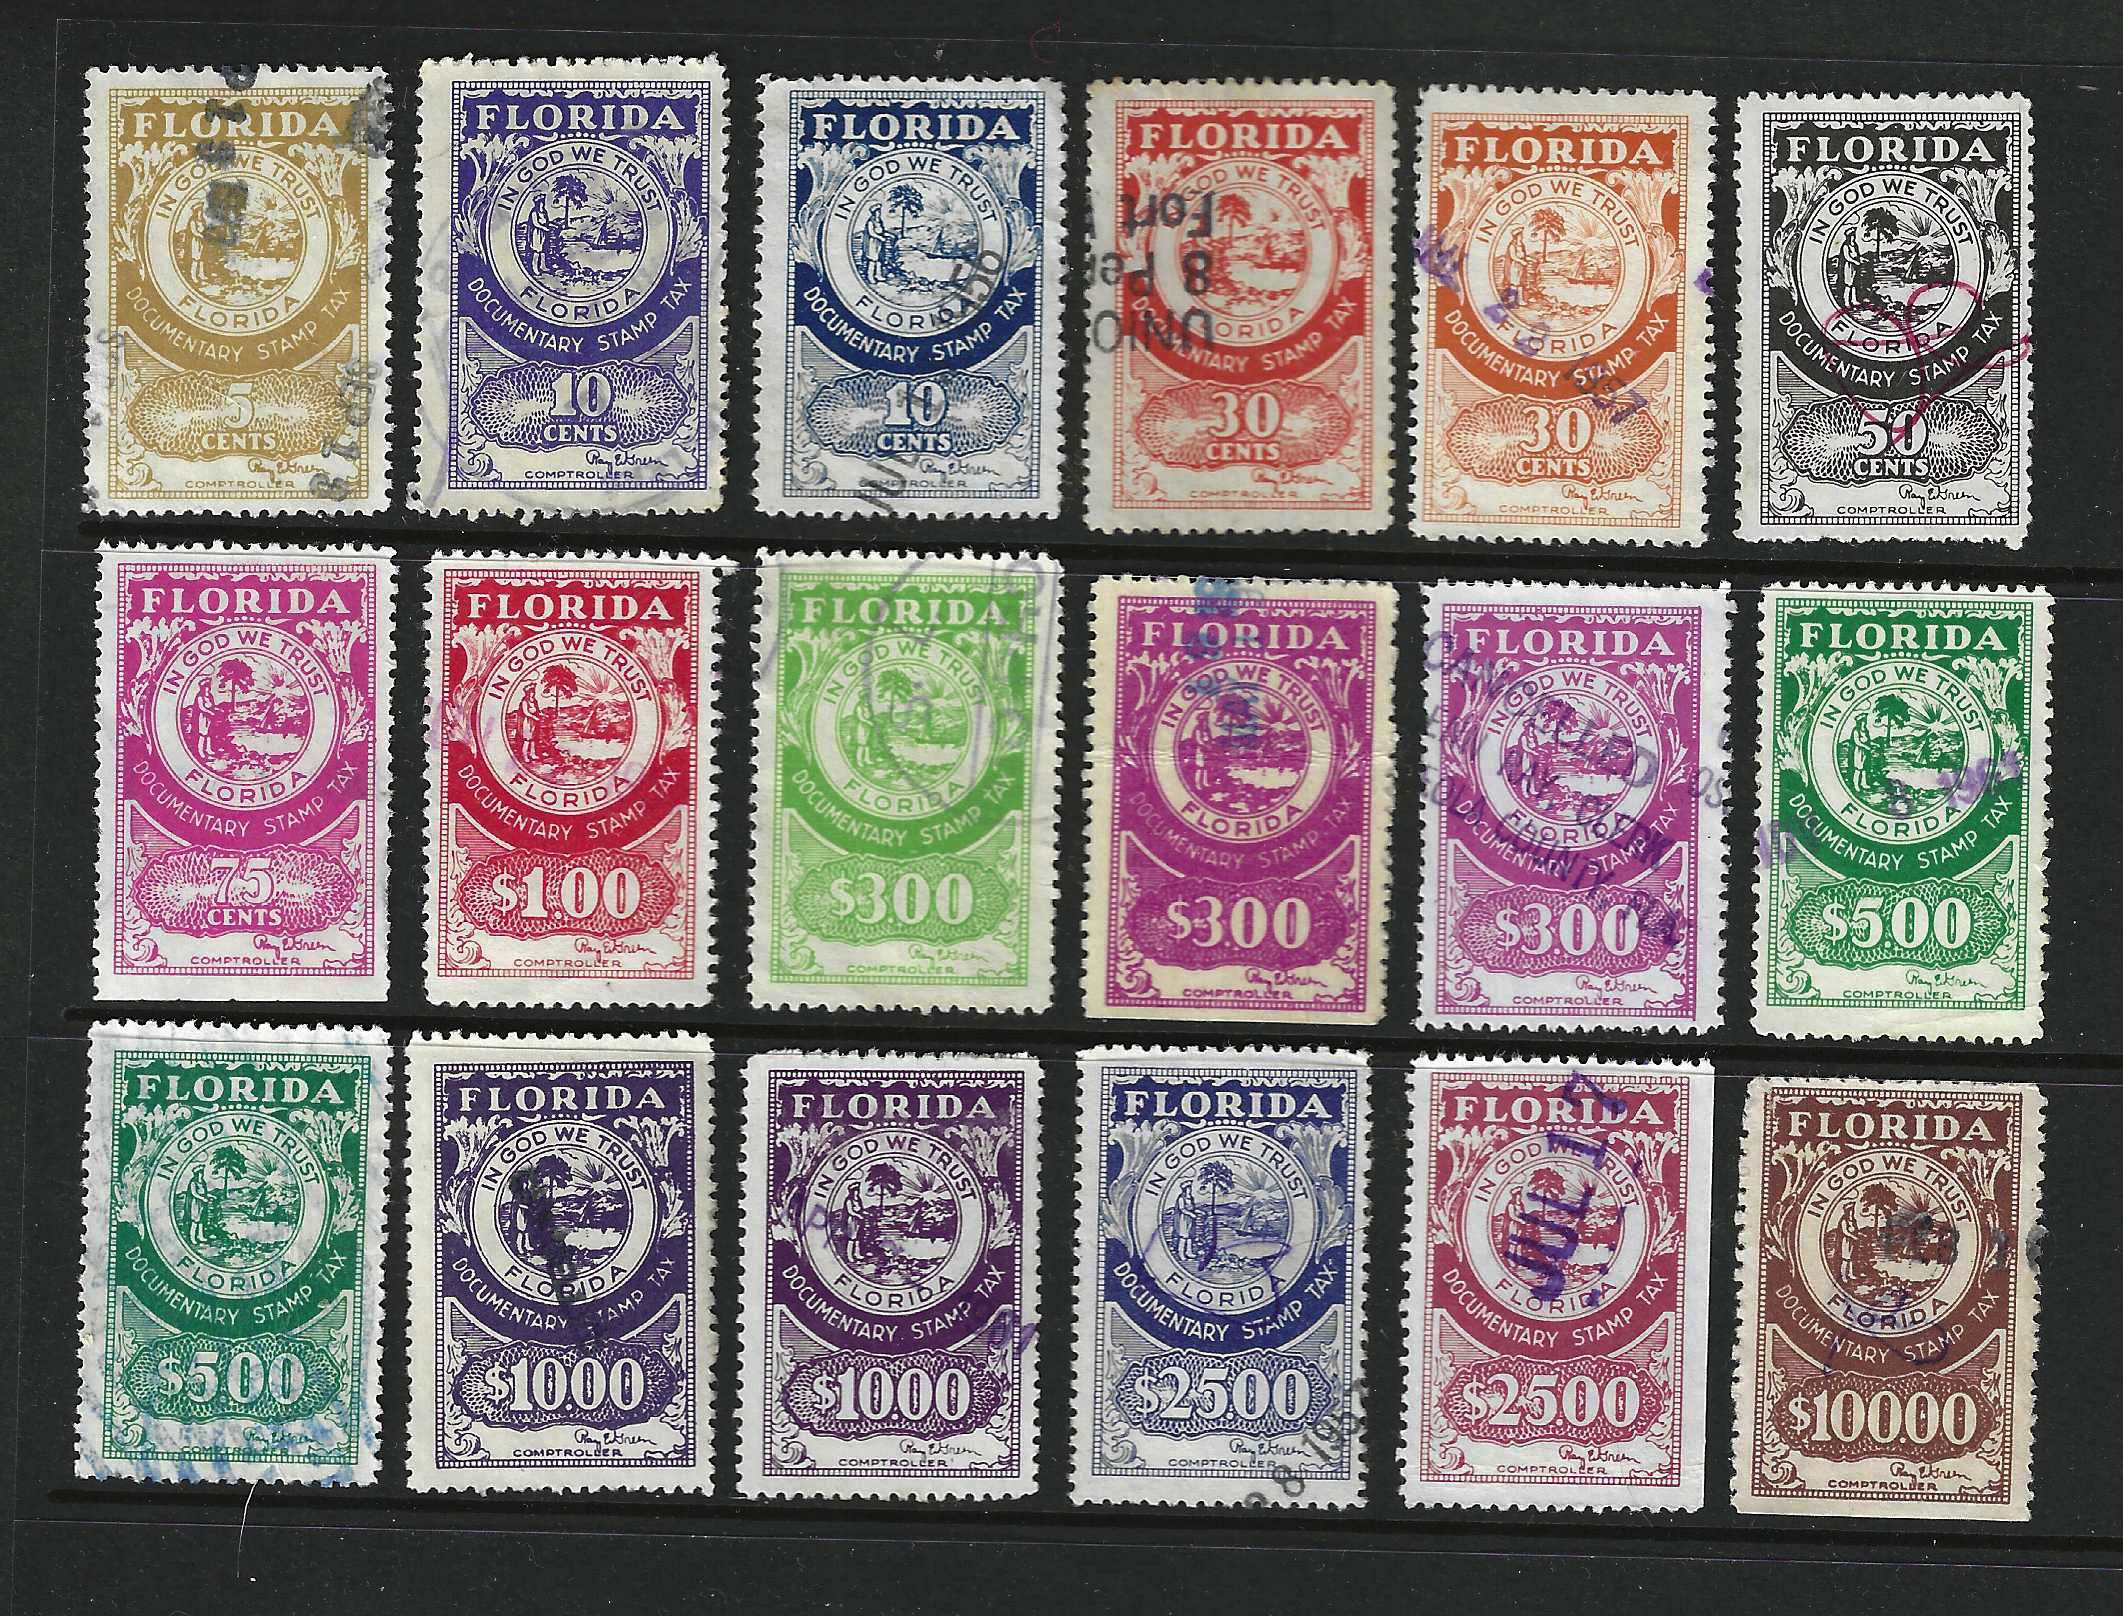 FL documentary Green sig 18 stamps between D35-D52a all U VF seral w/SE as seen in image